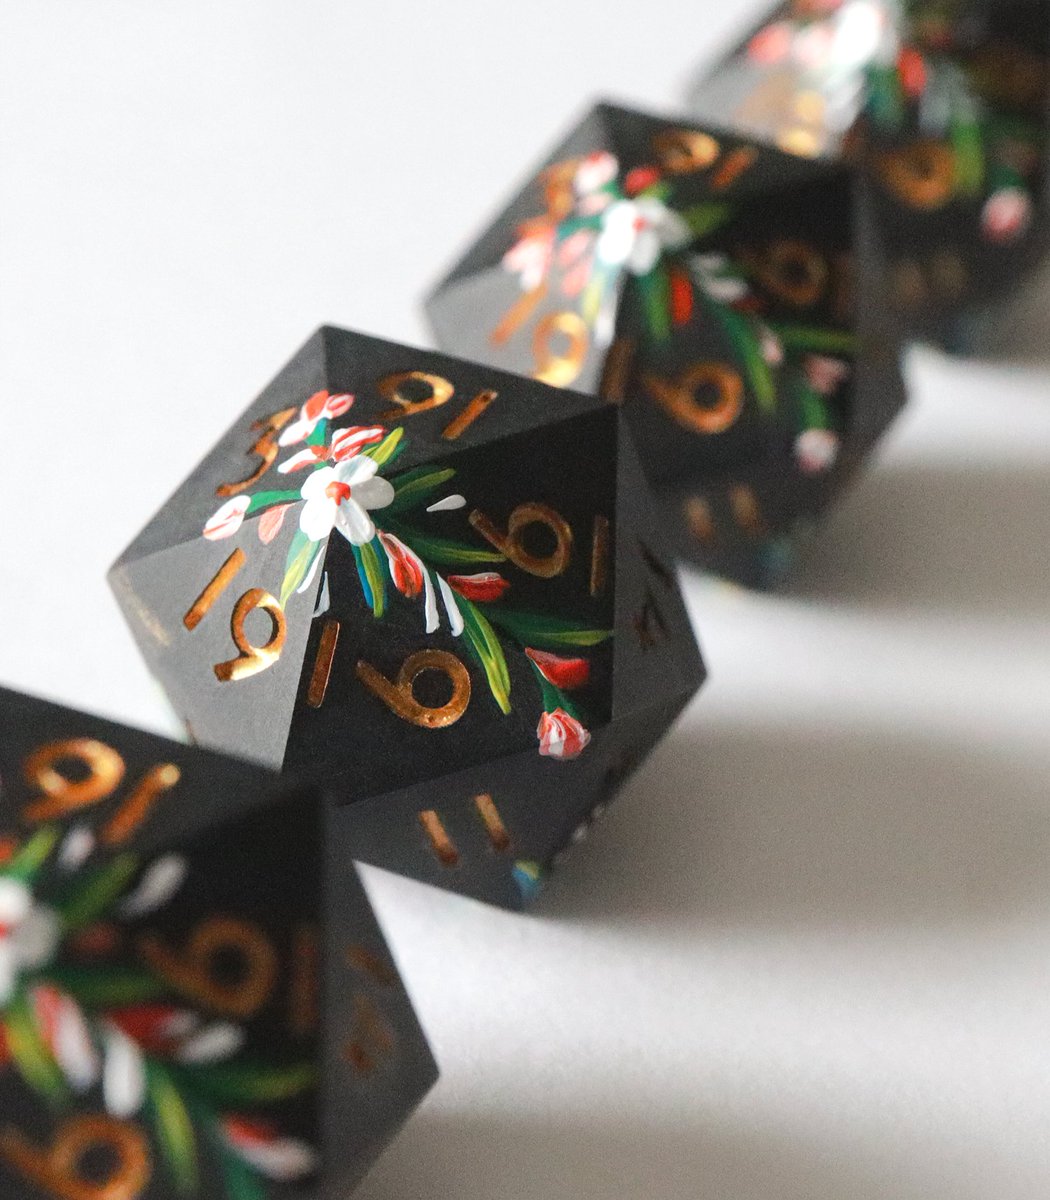 GIVEAWAY! 🌼🌿 The 4th of several giveaways this holiday season! Winner will receive a Fey Illuminations single d20! Ends Dec 13 at 12 PM PT. To enter: 1. Follow me 2. Like + RT this post I'm also giving away a second d20 on Instagram! instagram.com/everythingdice #dnd #ttrpg #dice